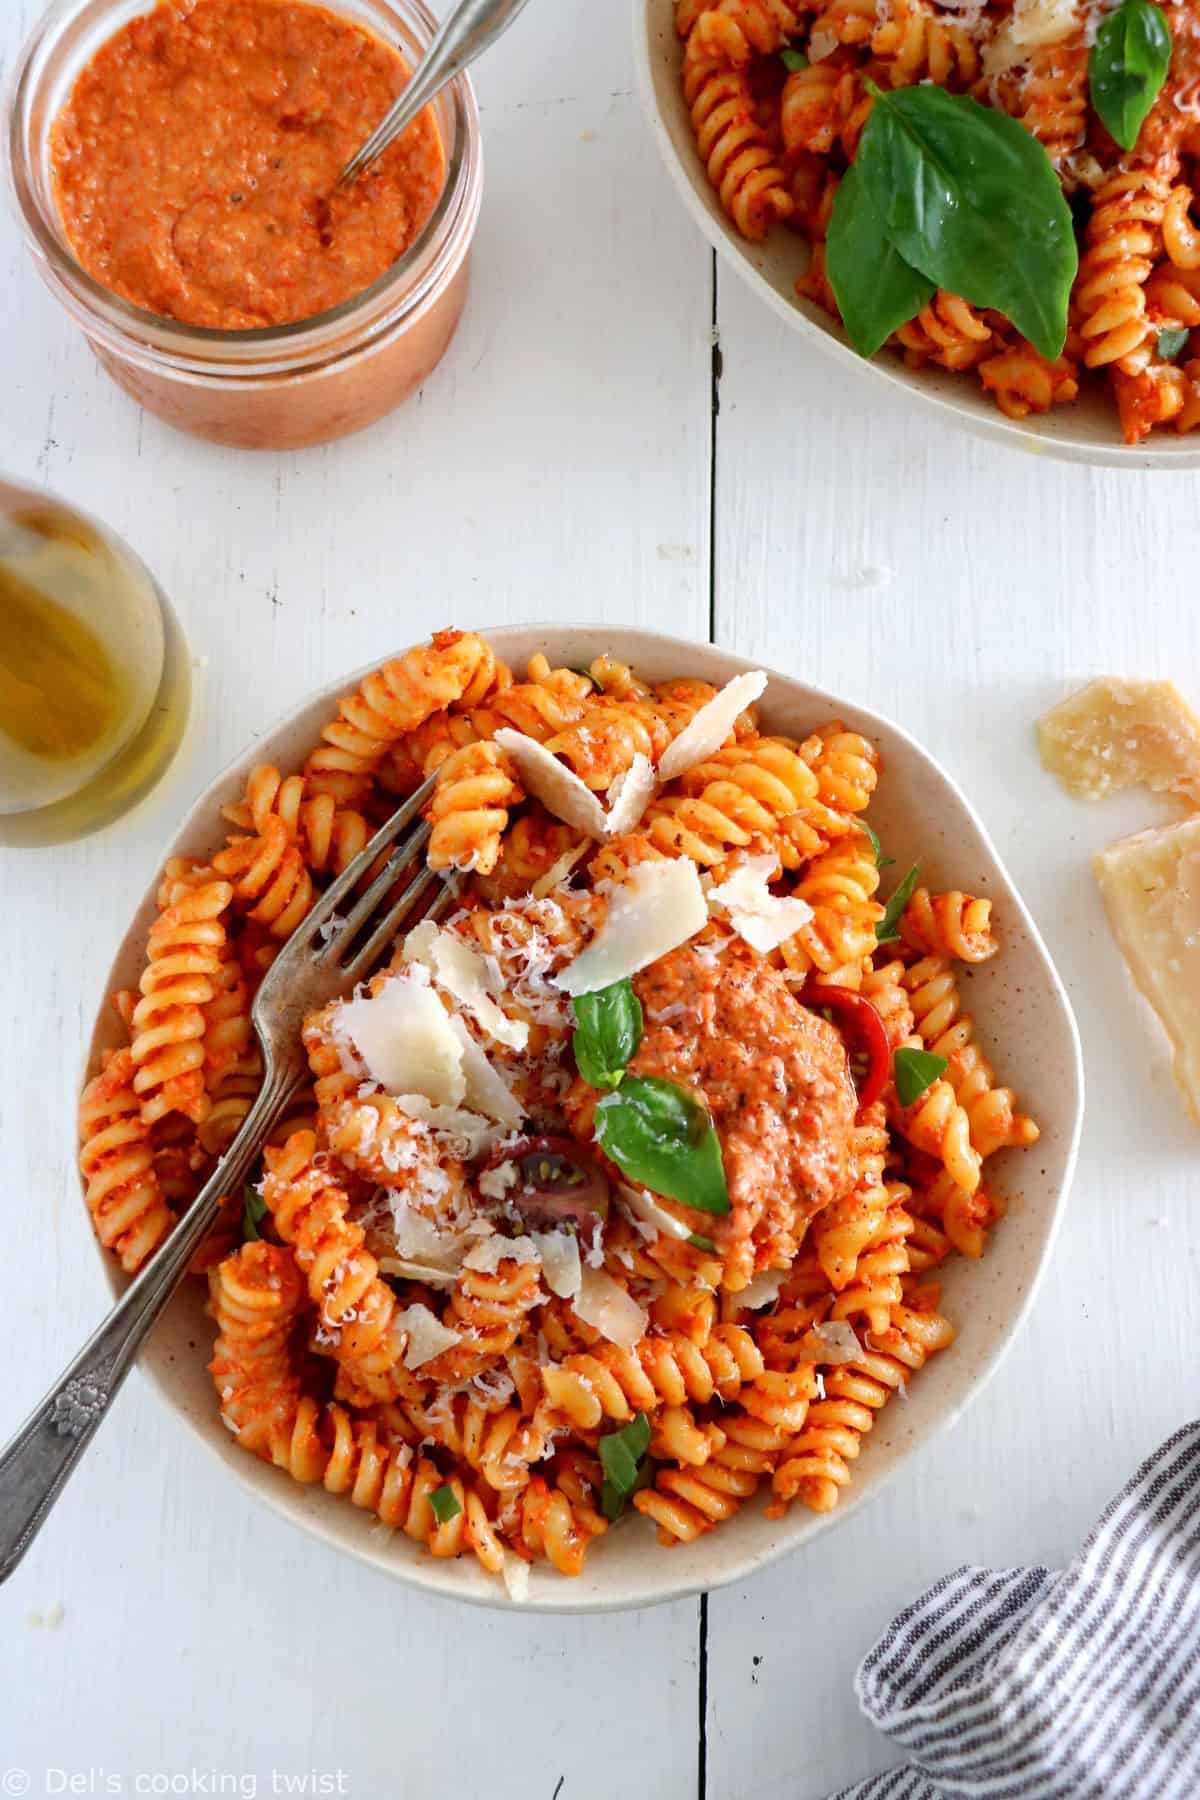 Roasted Red Pepper & Cashew Pasta - Del's cooking twist